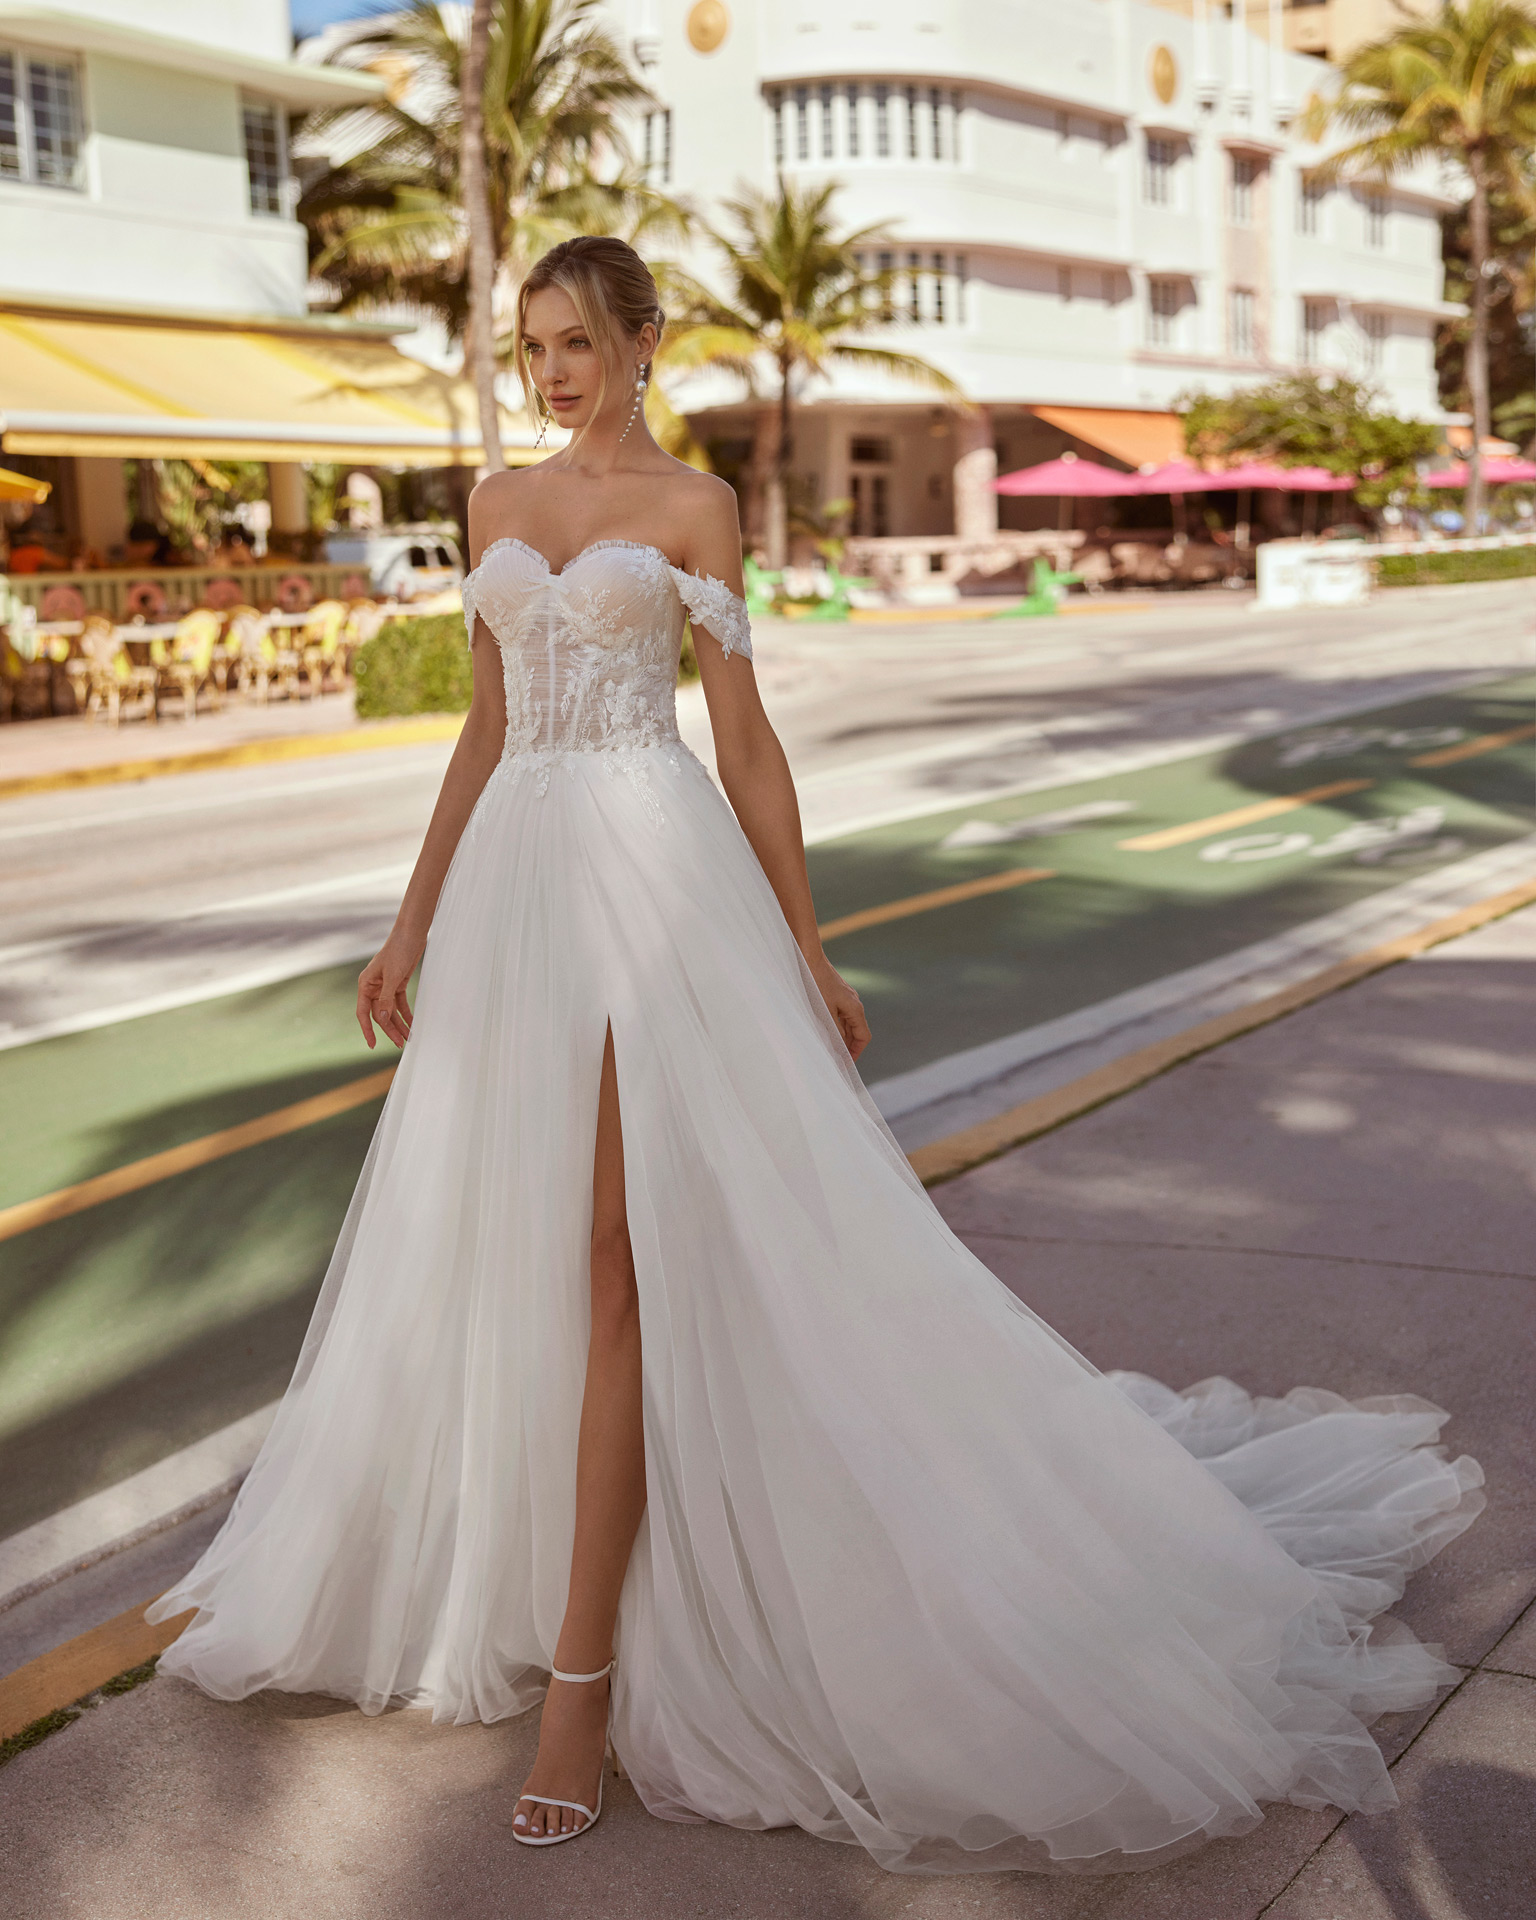 Romantic princess wedding dress. Crafted in tulle, it features a sweetheart neckline, buttoned back, detachable straps and skirt with a front slit. A delicate Luna Novias design. LUNA_NOVIAS.